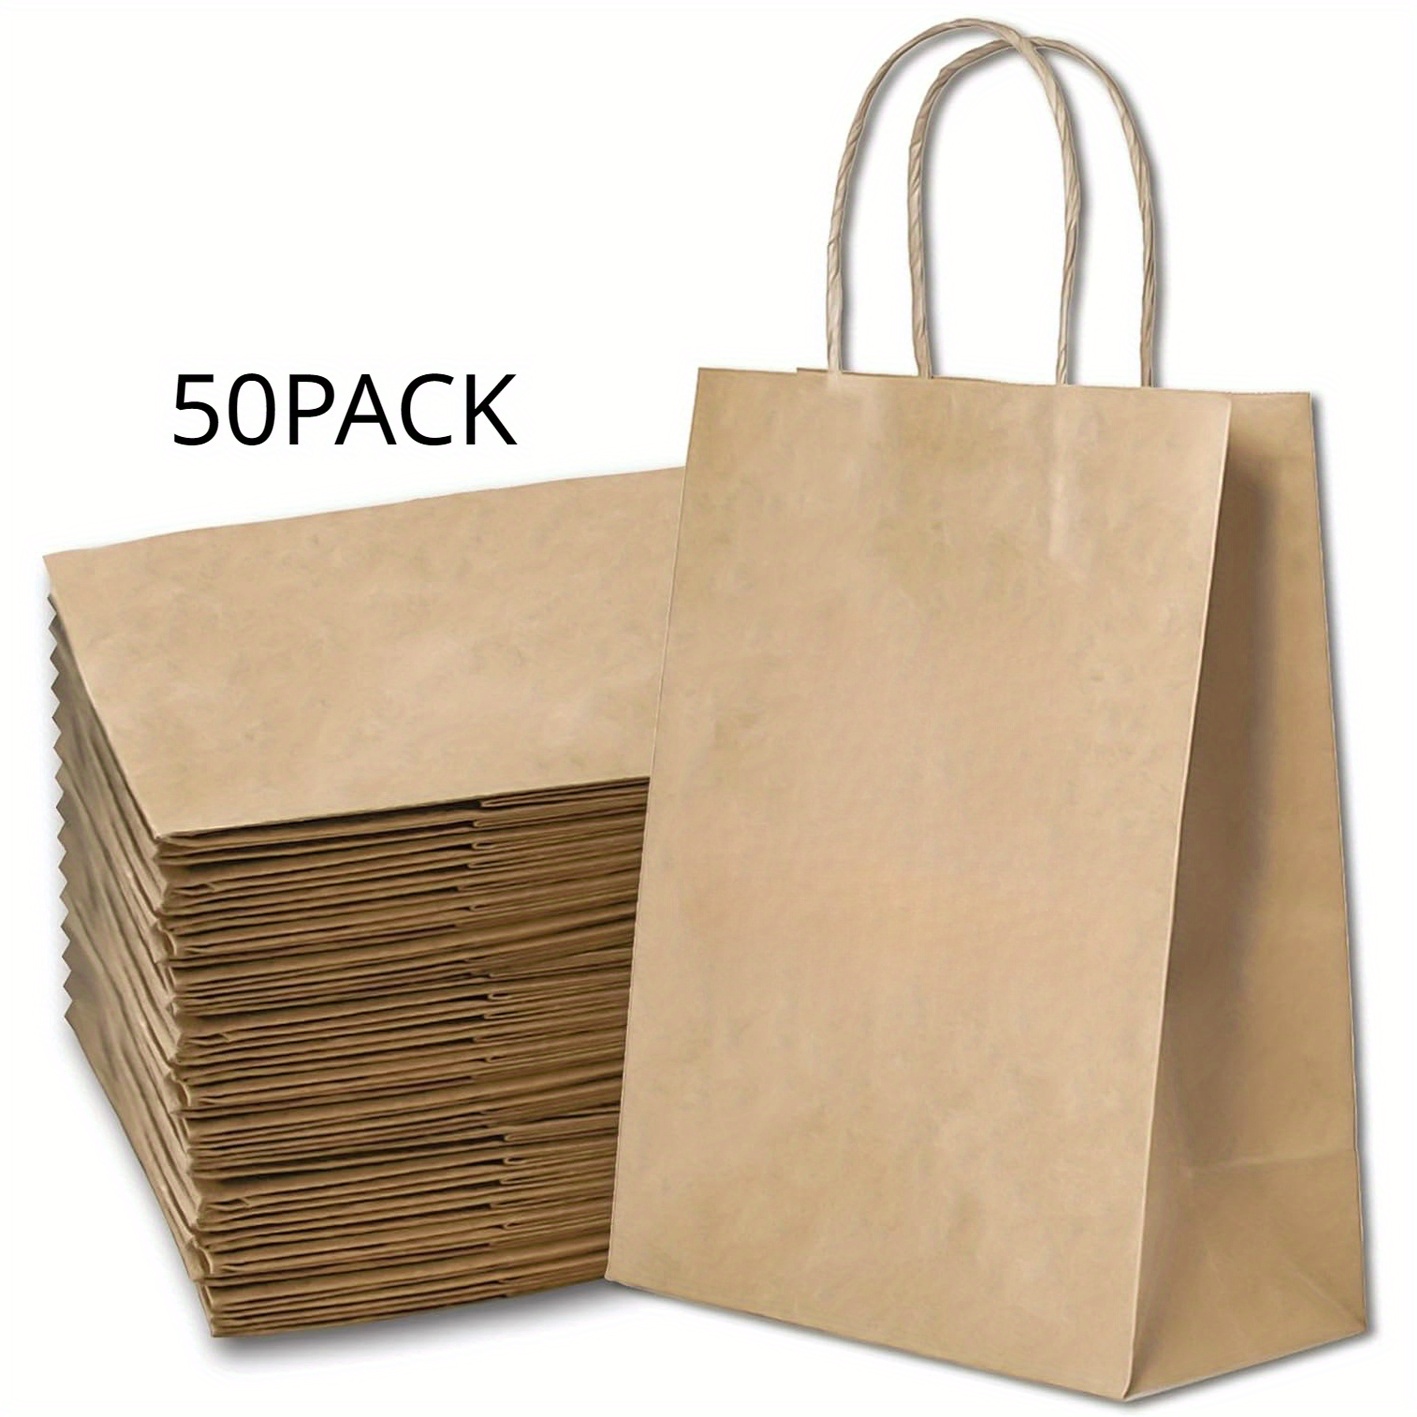 

multipurpose" 50-pack Brown Kraft Paper Gift Bags With Handles - Perfect For Small Business, Christmas, Wedding Favors, Shopping & Halloween Trick-or-treat